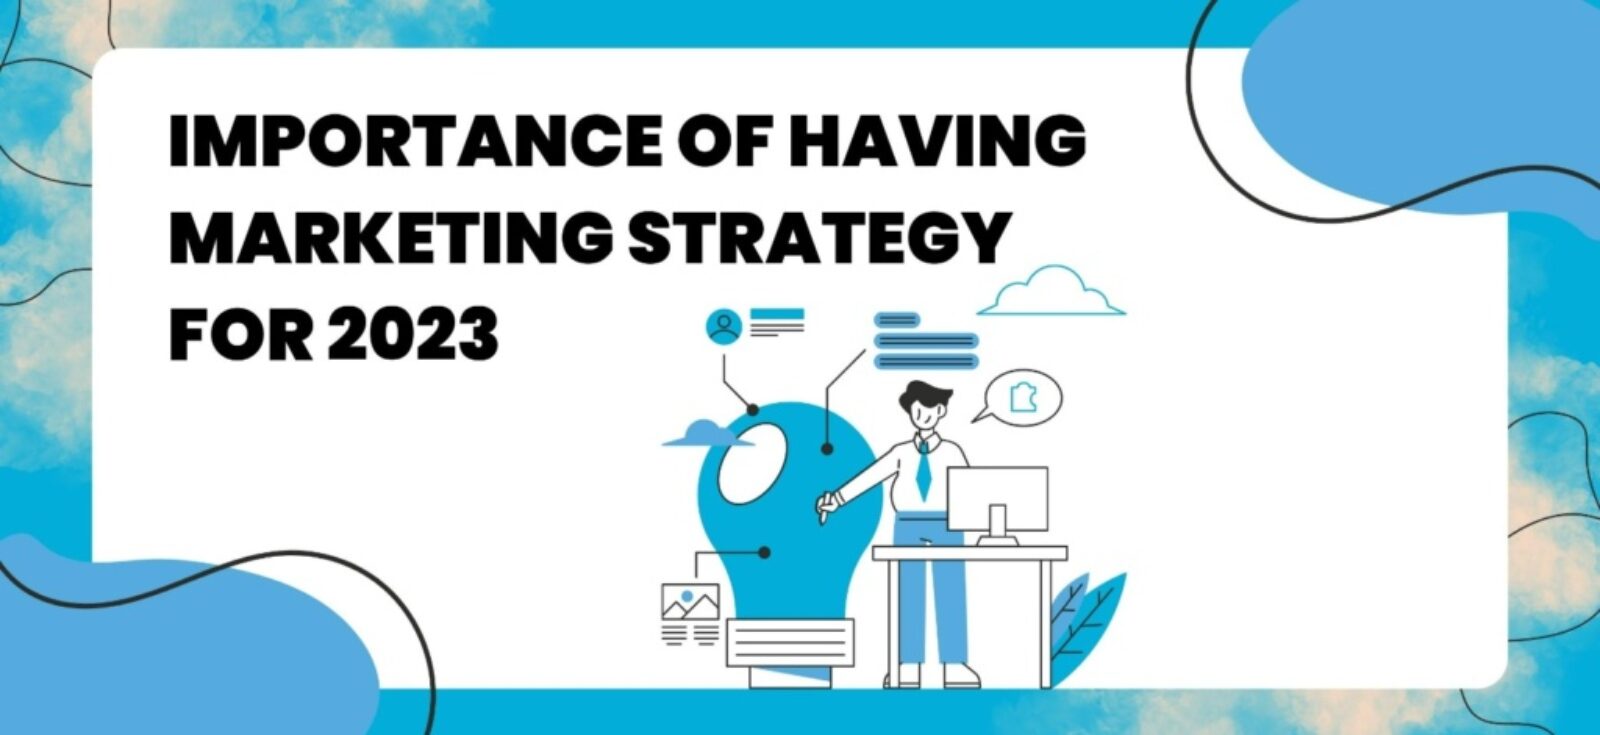 Importance of having a marketing strategy for 2023